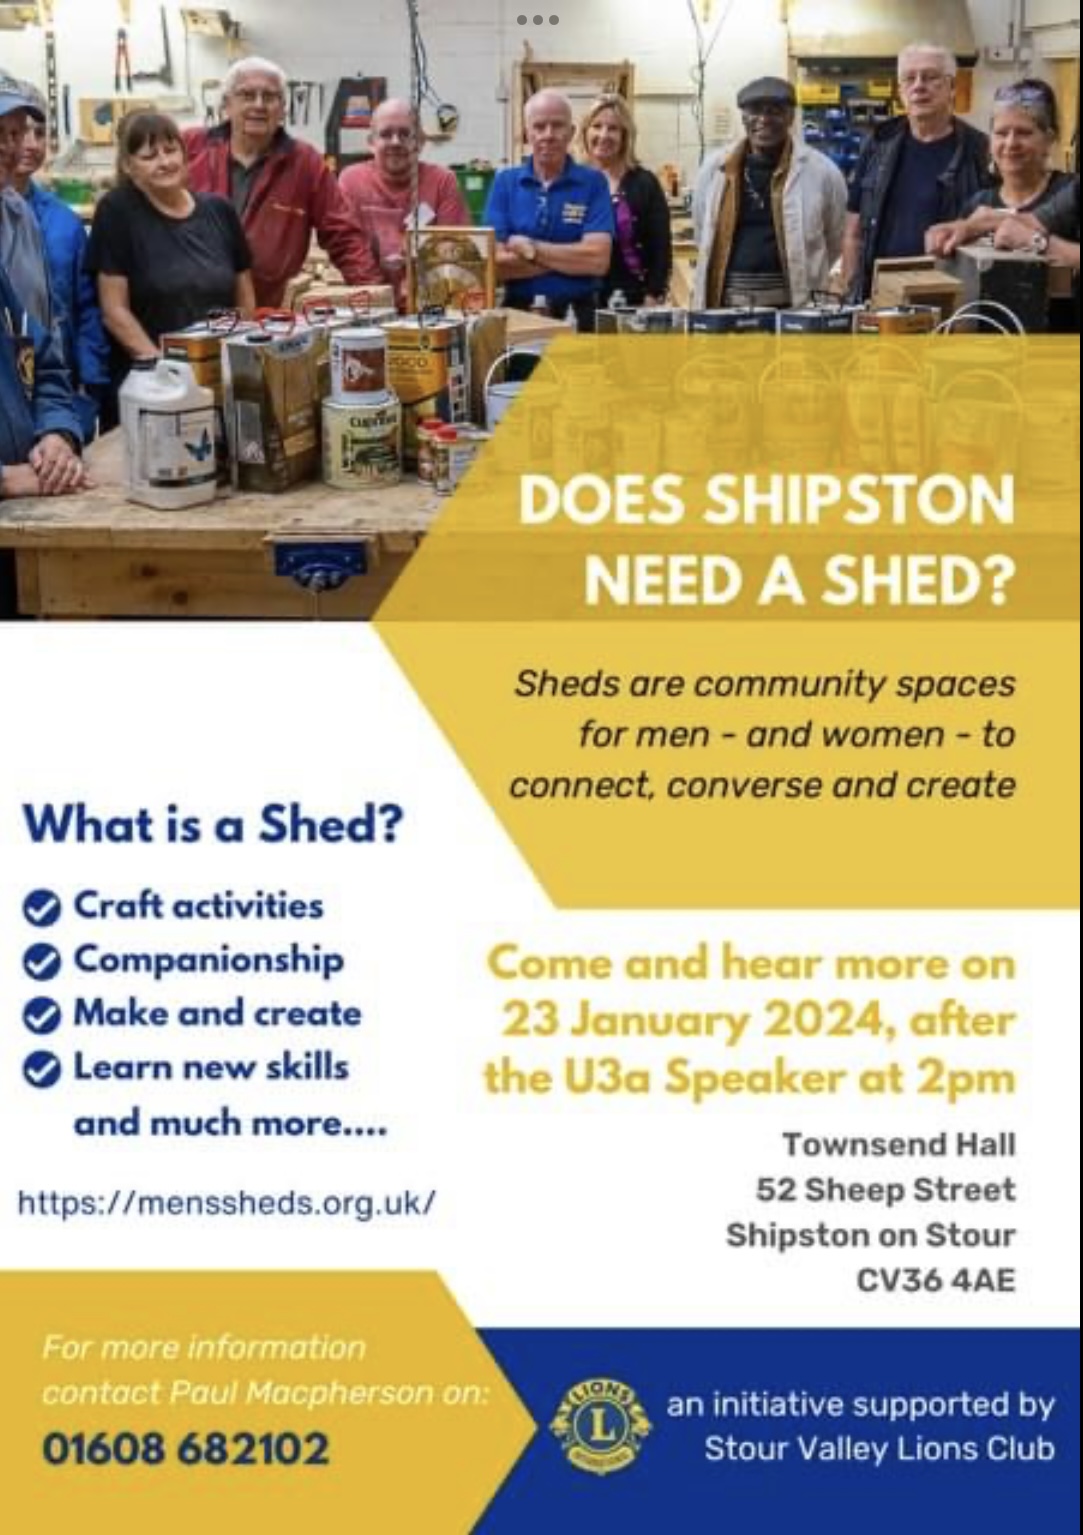 Does Shipston Need a Shed?